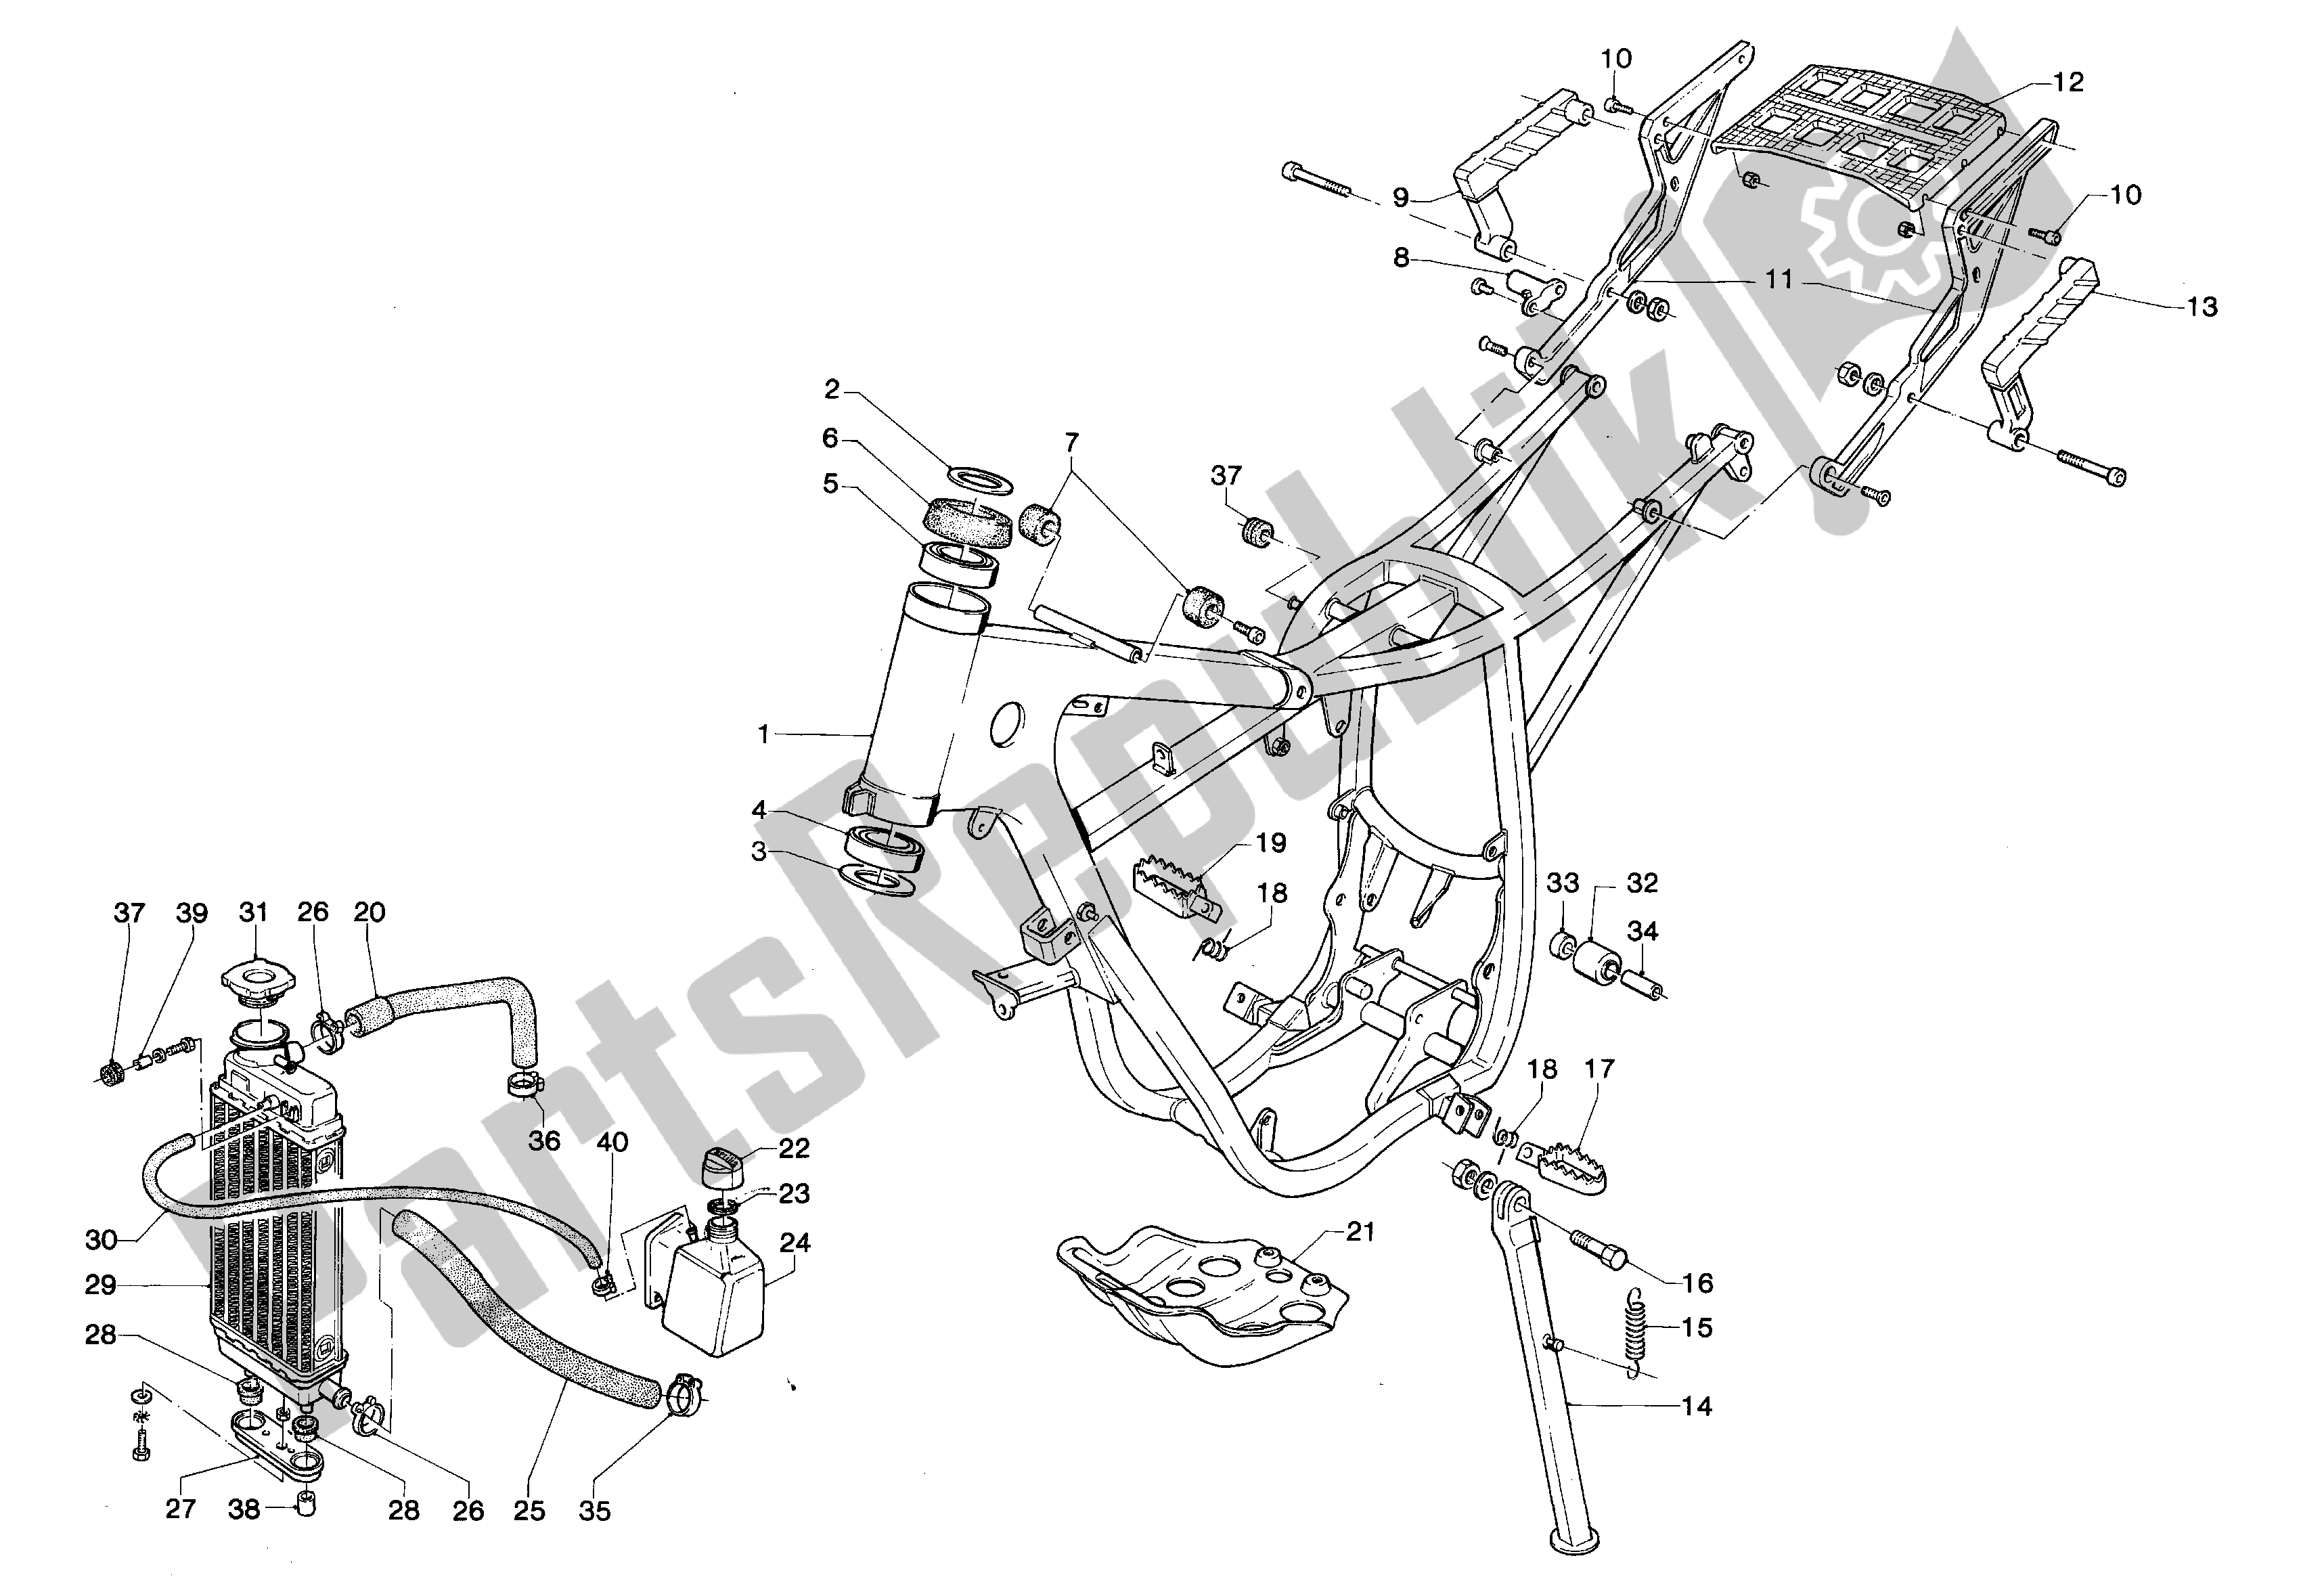 All parts for the Frame of the Aprilia ET 50 1987